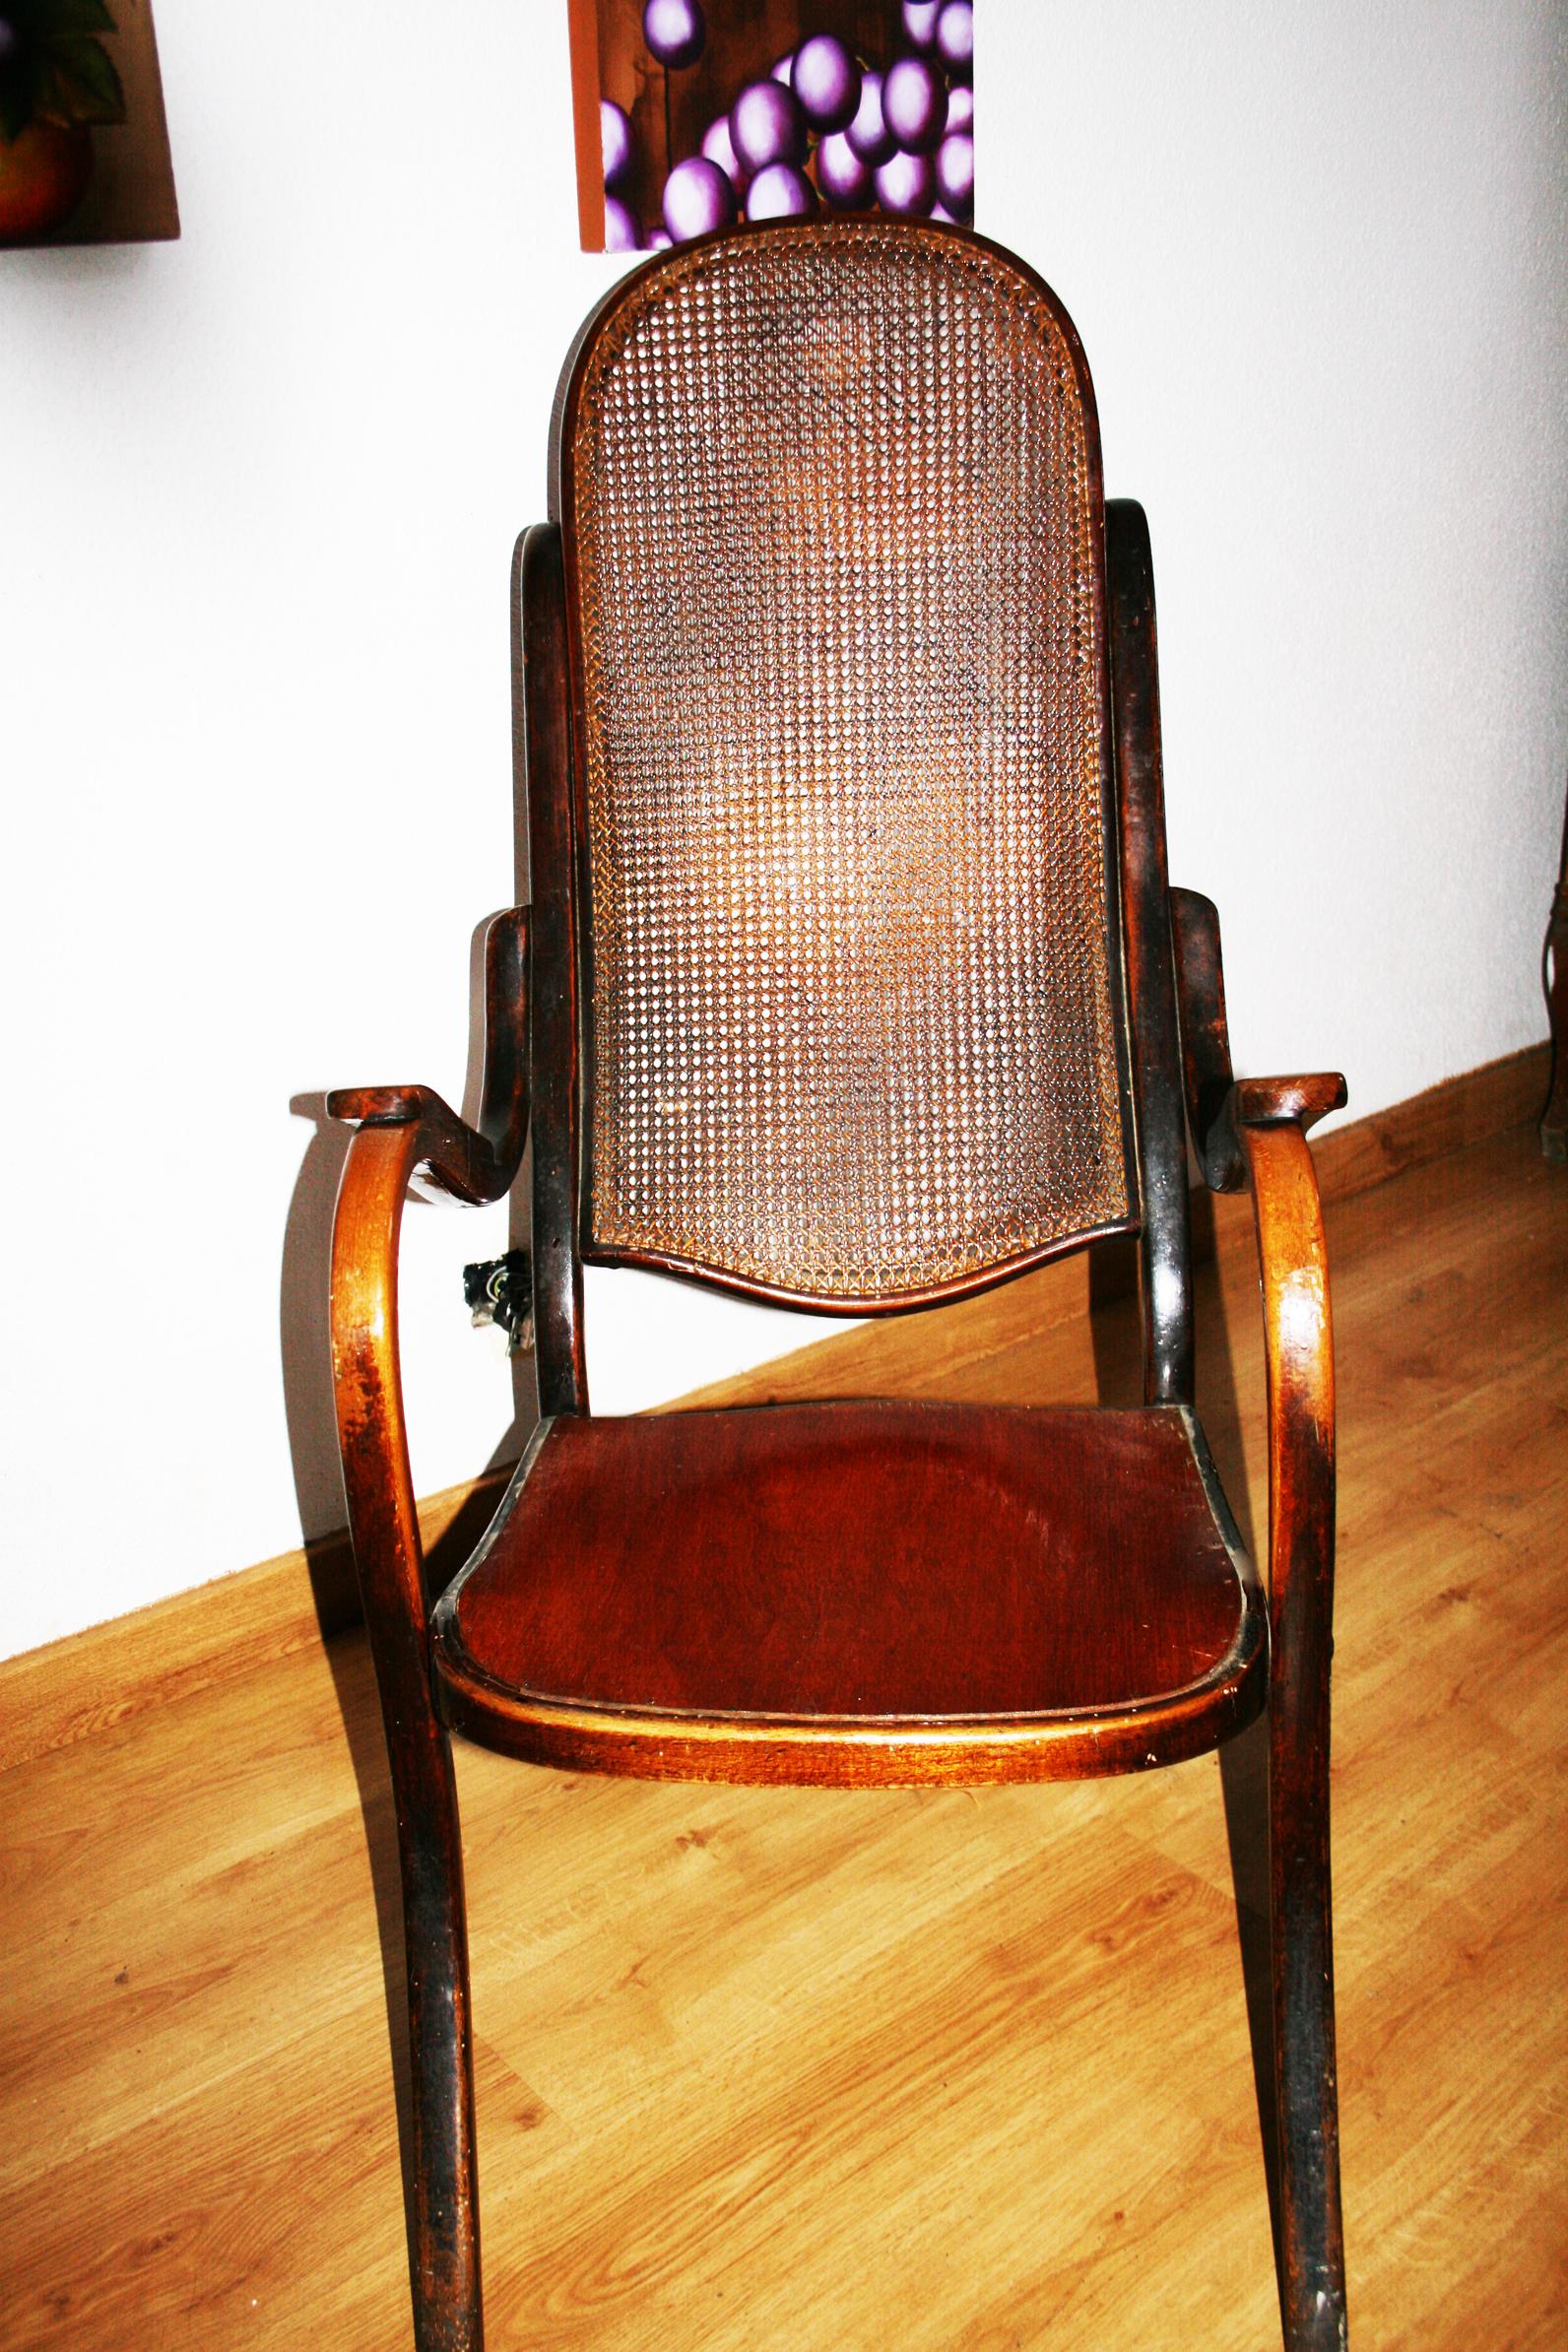 Thonet armchair in bentwood with high backrest with Viennese straw. 

Attributed Thonet it does not keep the seal since it was probably paper and was lost over the years

This relaxing chair or fireplace armchair is perfect for relaxing

In this